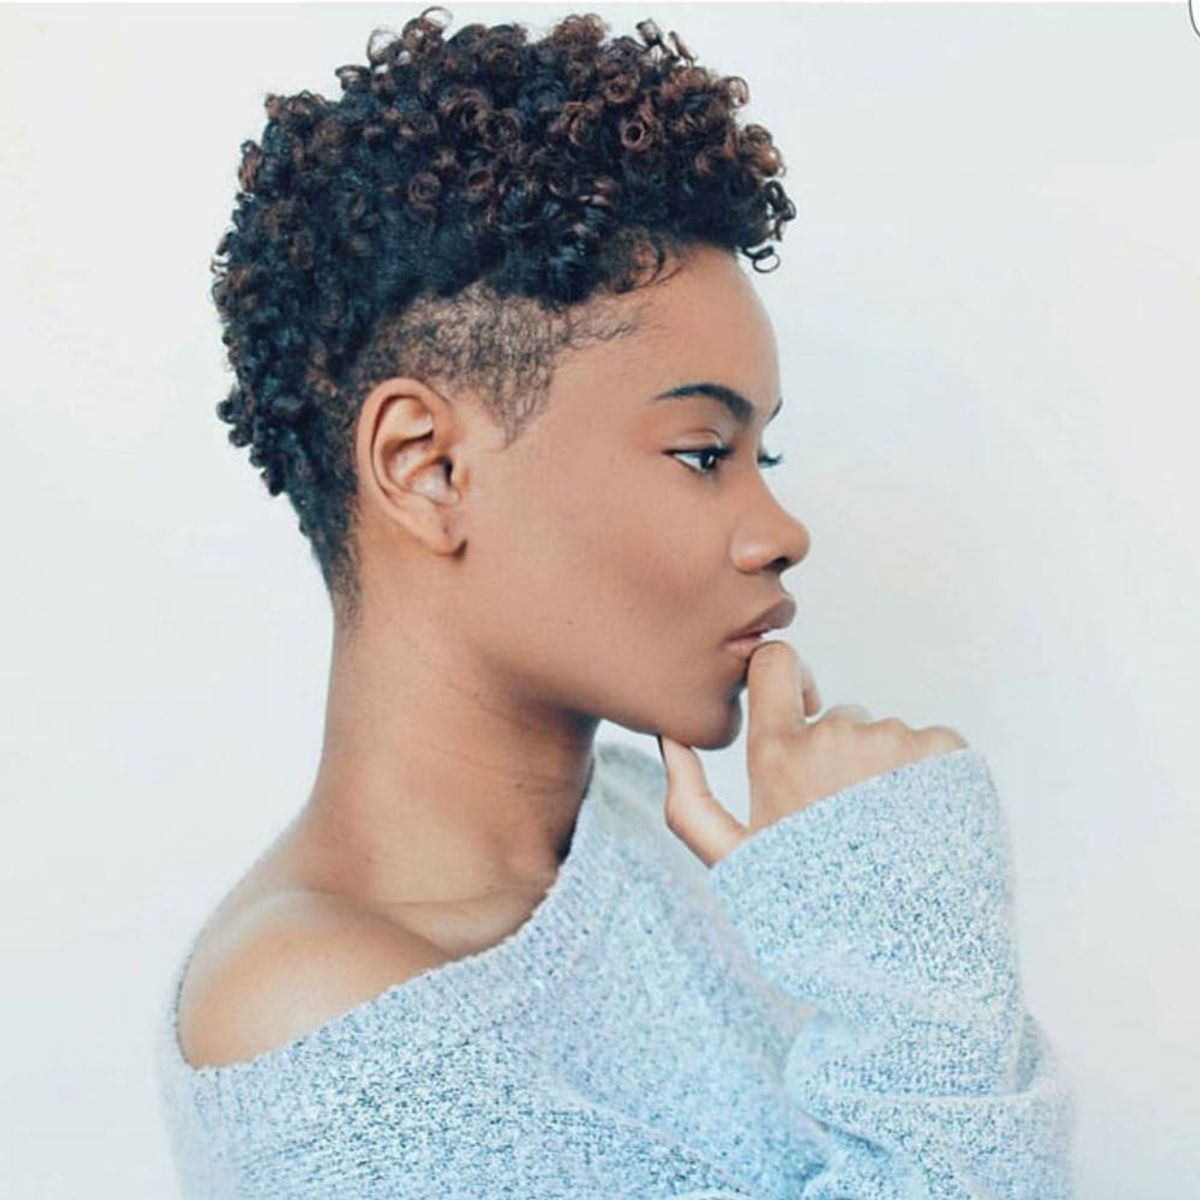 11 Shaved Hairstyles That Will Make You Want an Undercut